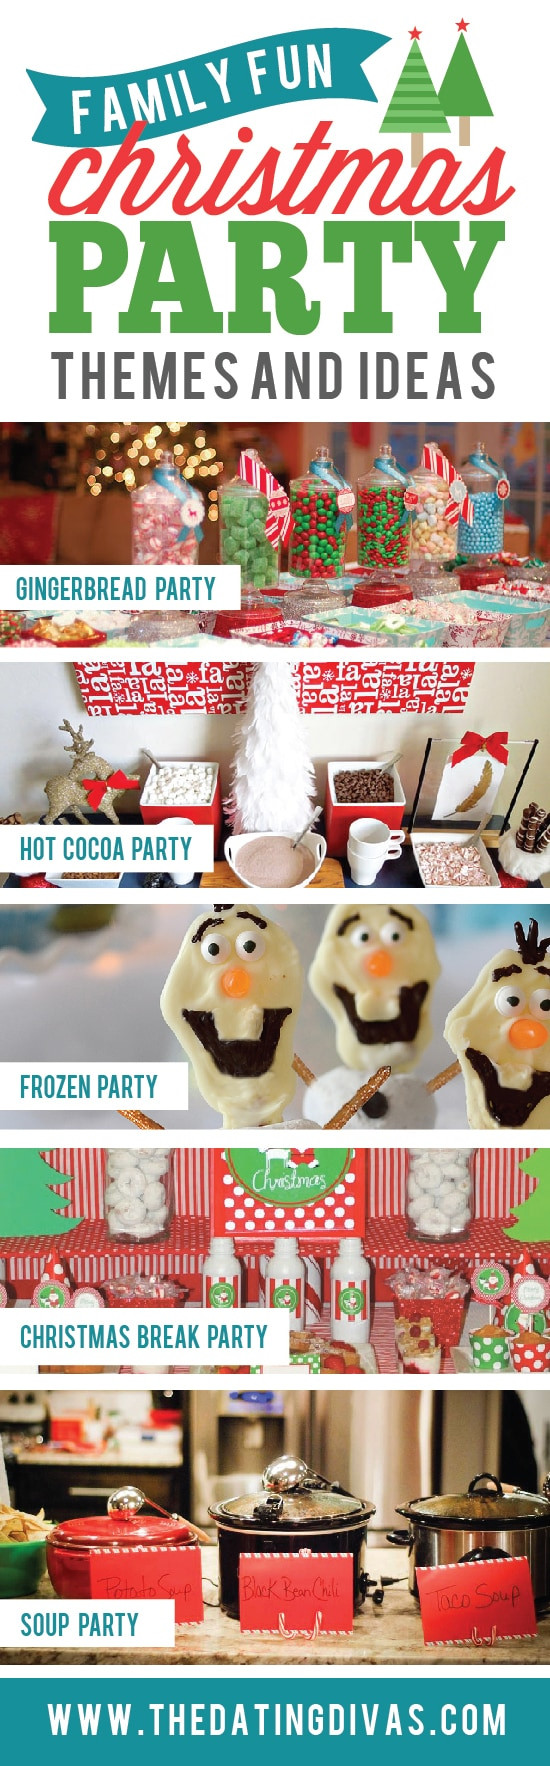 Fun Christmas Party Ideas
 15 Christmas Party Themes From the Dating Divas